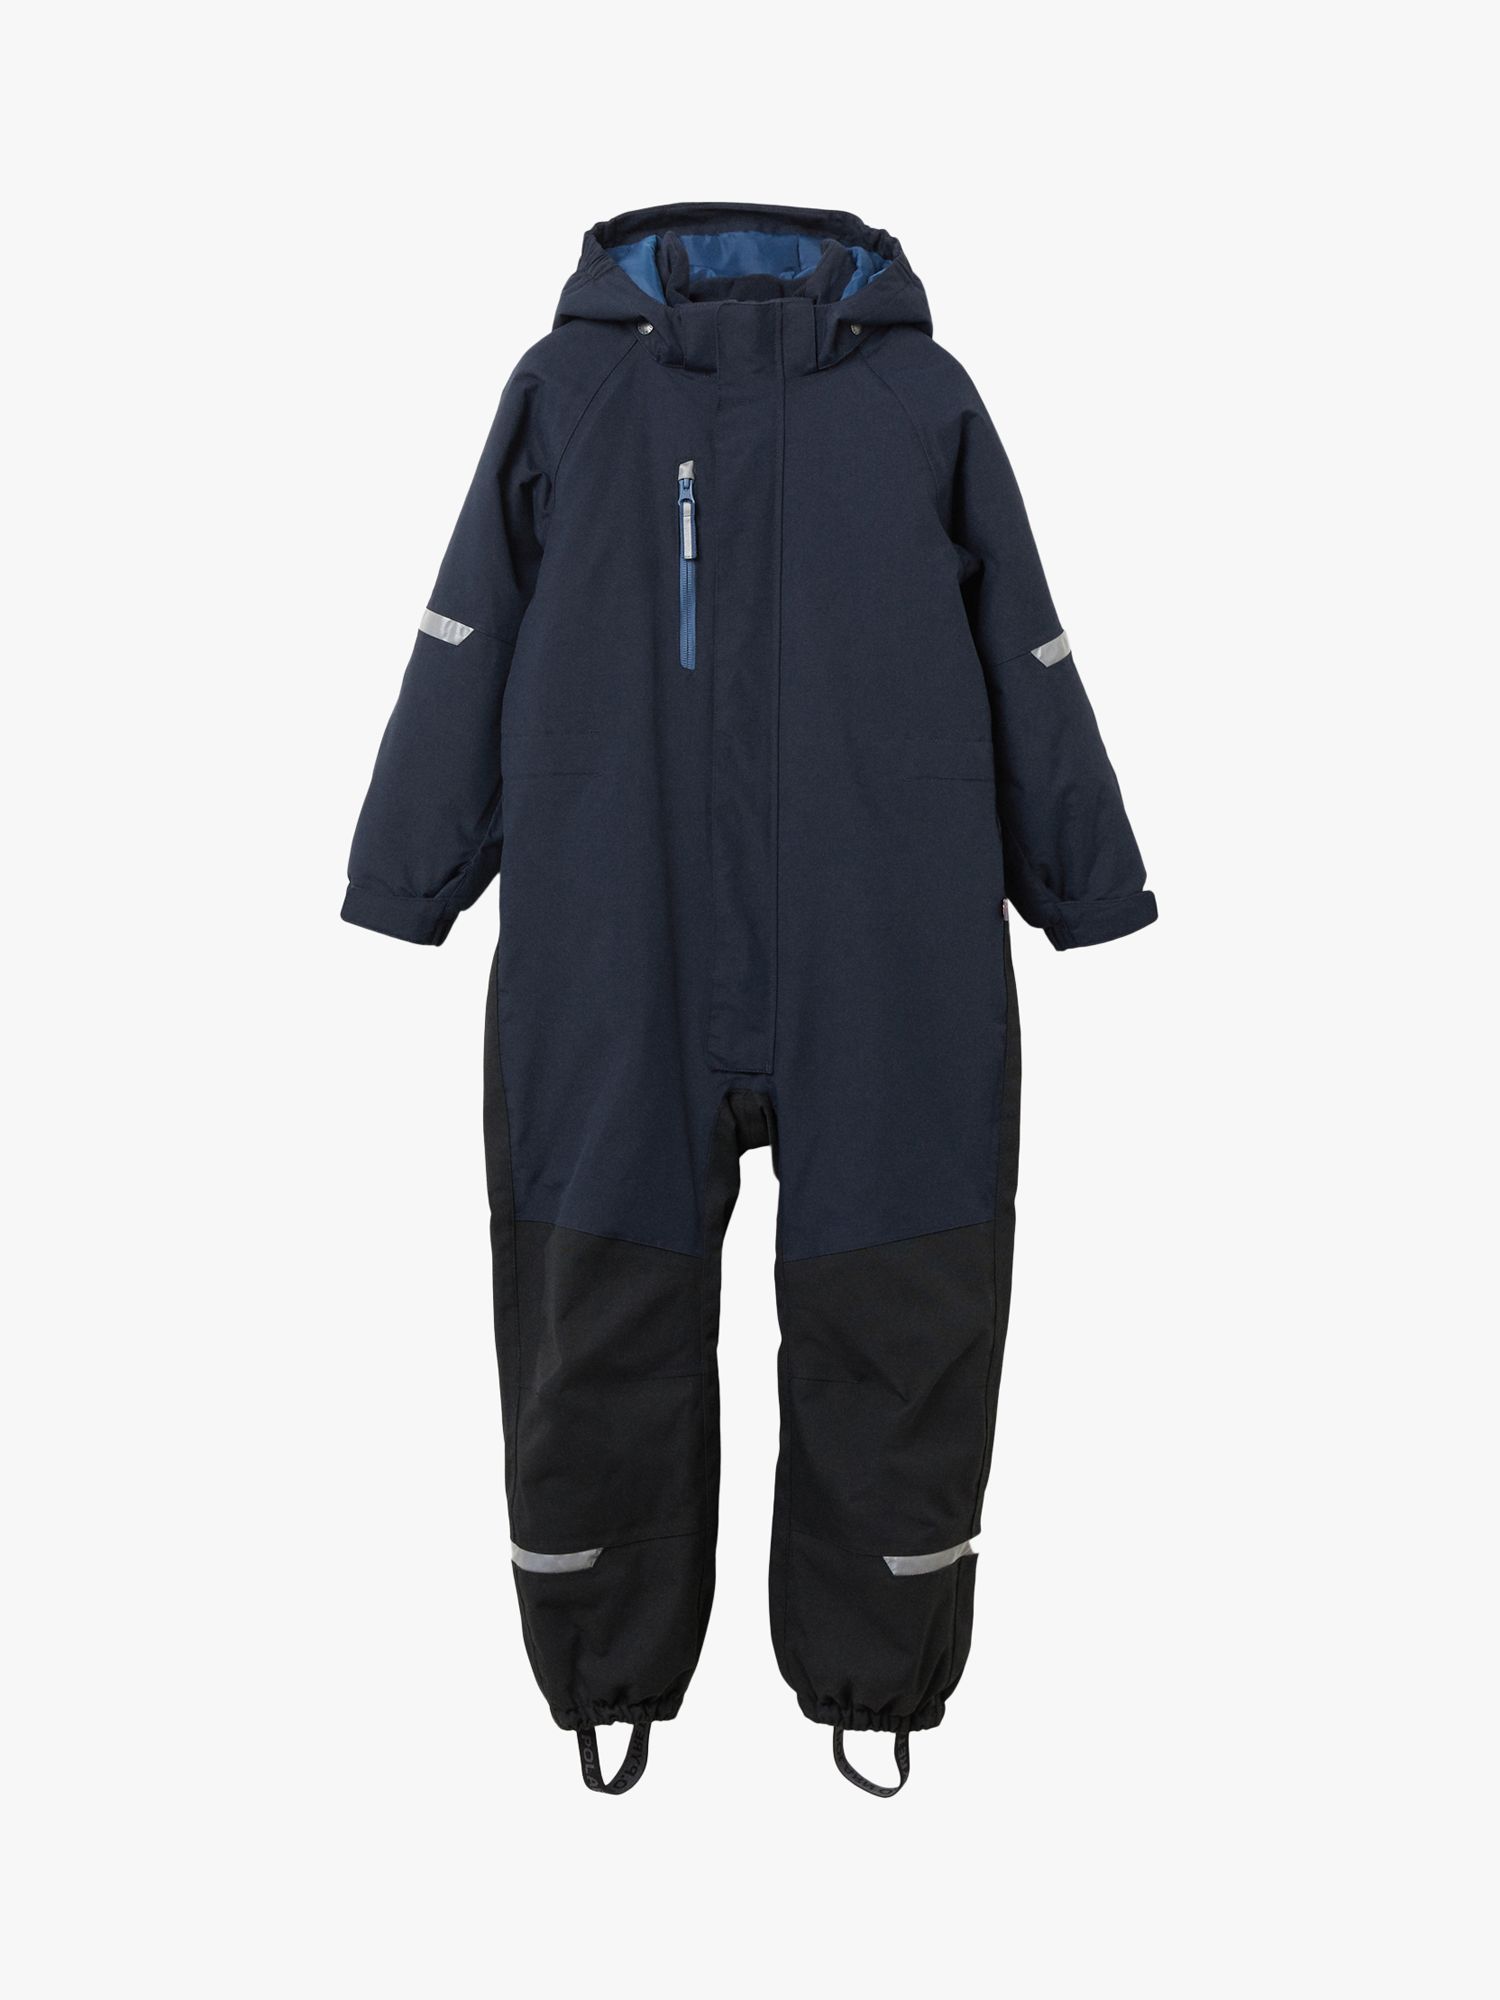 Polarn O. Pyret Kids' Waterproof Lined Hooded Overall, Blue, 12-18 months